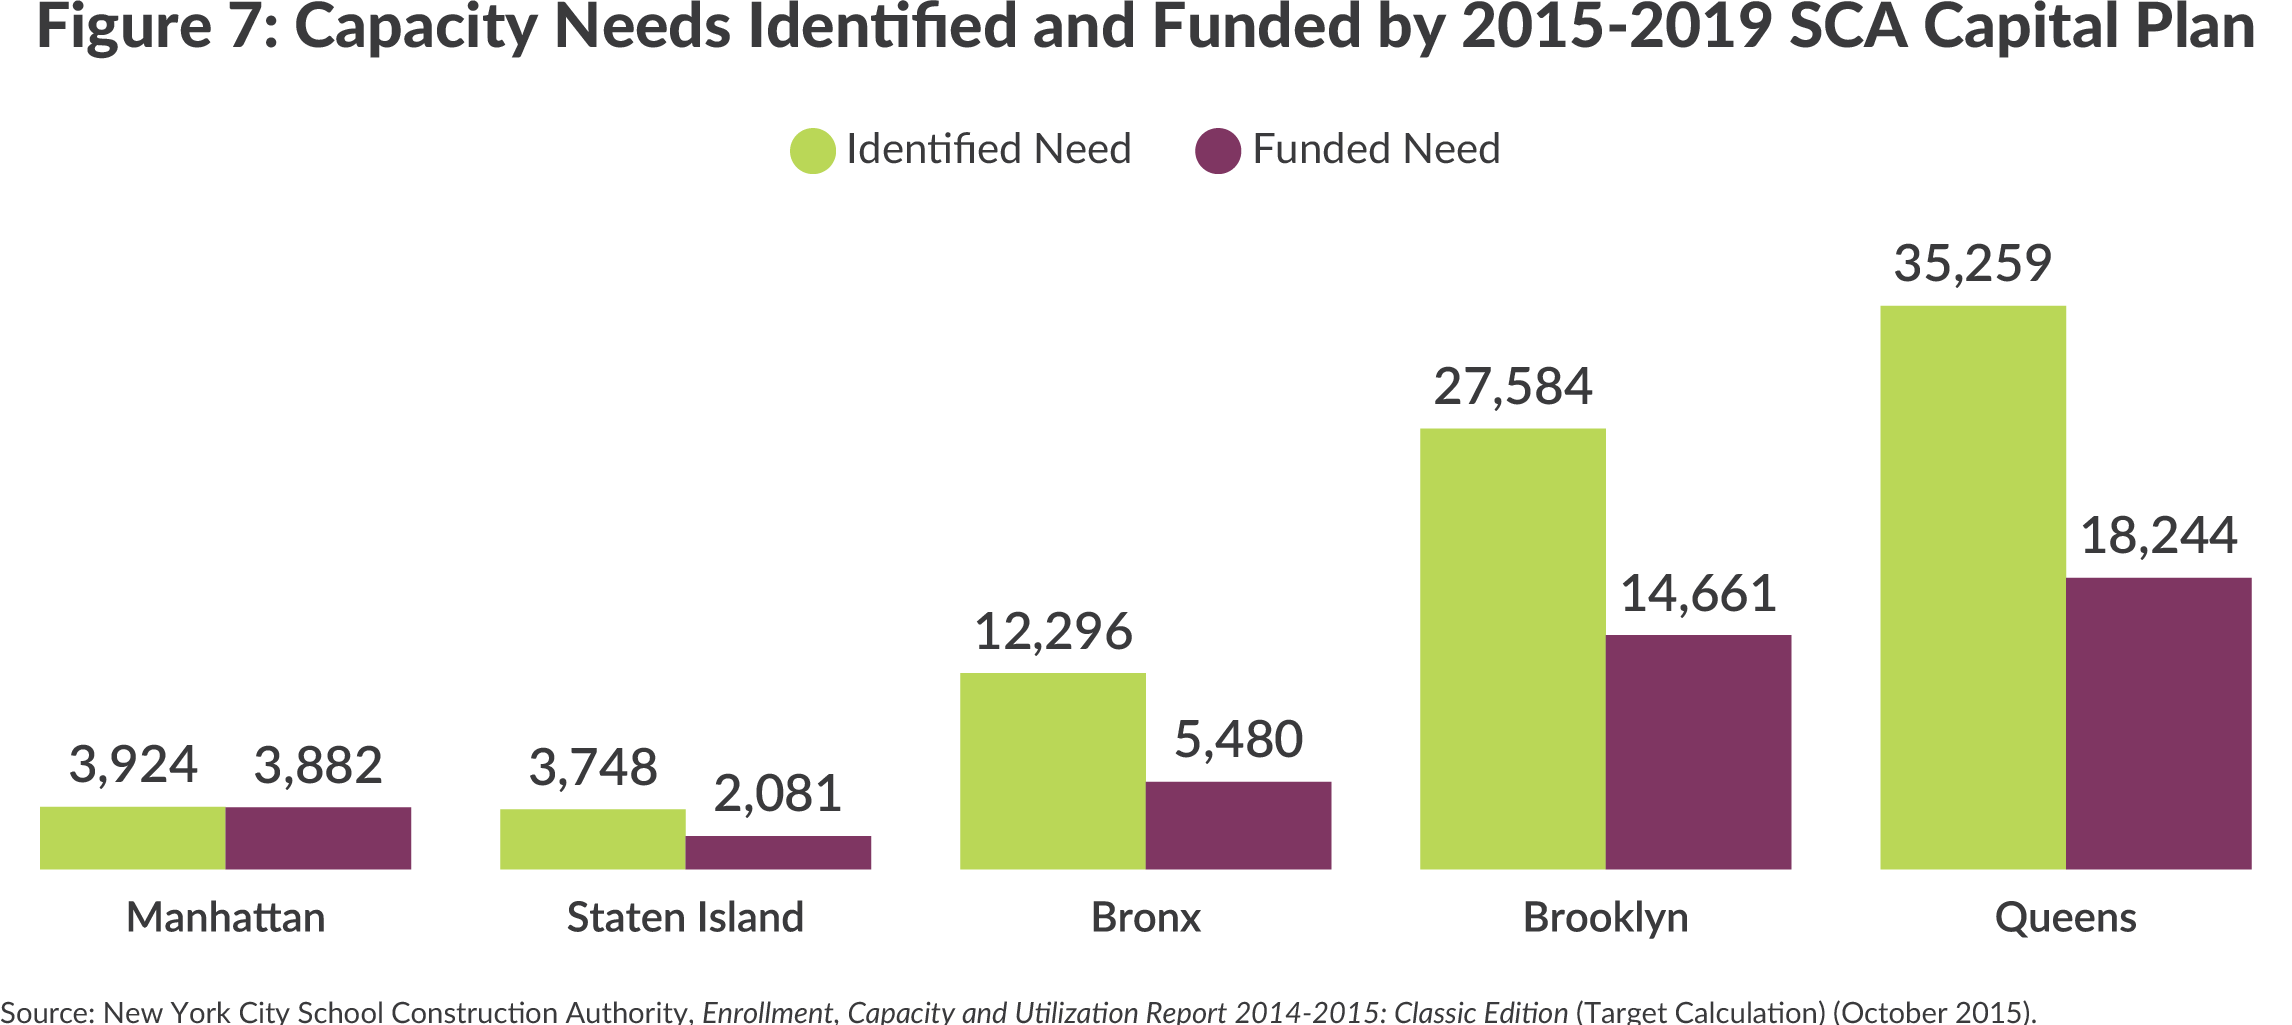 Bar chart showing how many needed public school seats are funded in each borough in SCA capital plan